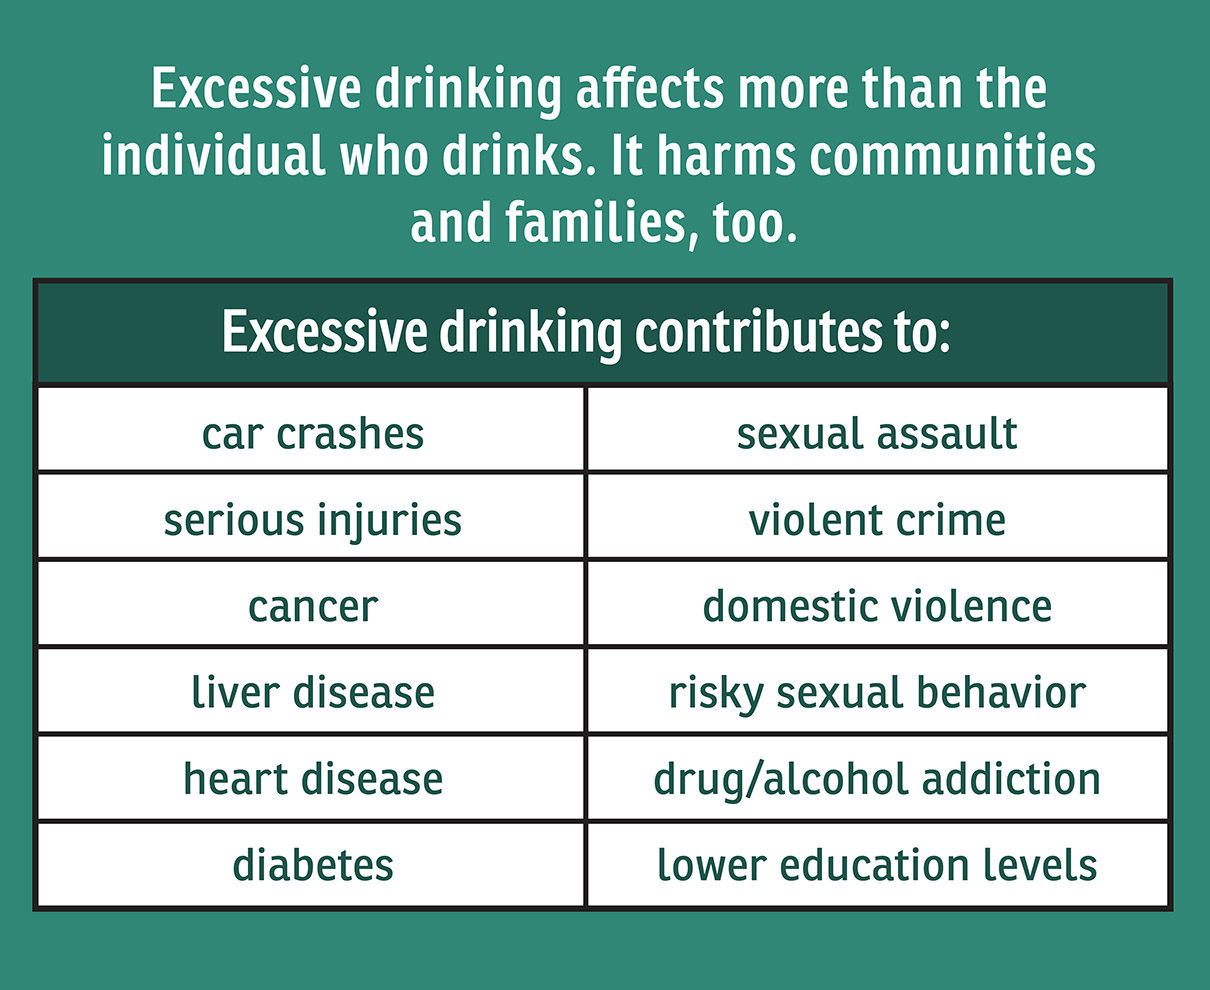 Excessive drinking affects more than the individual who drinks. It harms communities and families too. Excessive drinking contributes to: car crashes, serious injuries, cancer, liver disease, heart disease, diabetes, sexual assault, violent crime, domestic violence, risky sexual behavior, drug alcohol addition and lower education levels.